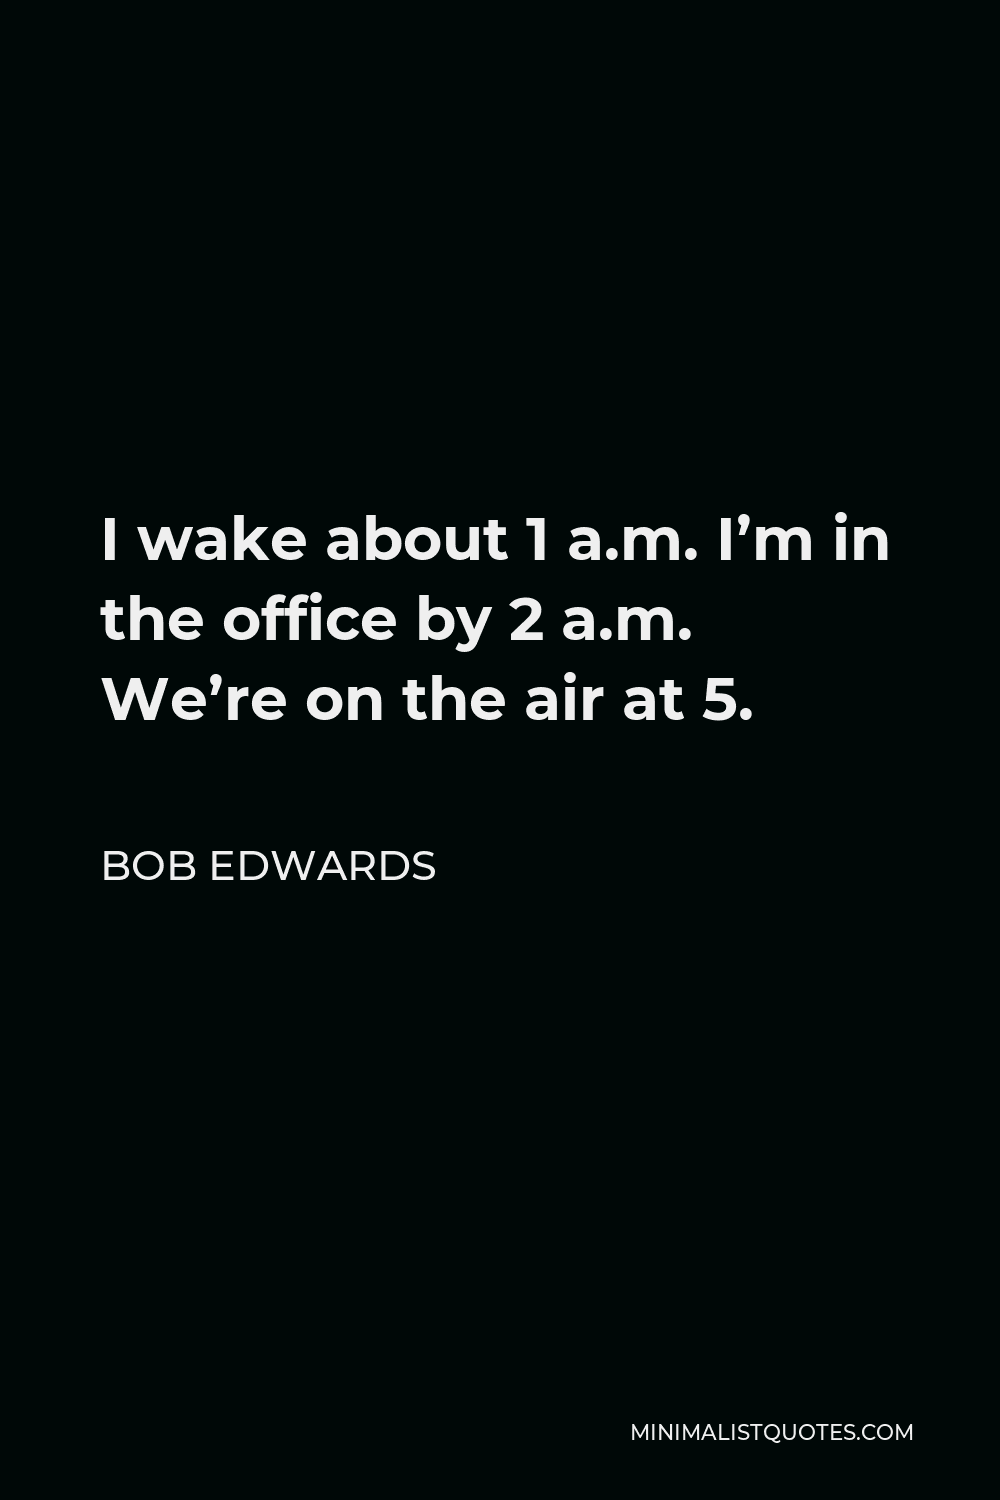 Bob Edwards Quote - I wake about 1 a.m. I’m in the office by 2 a.m. We’re on the air at 5.